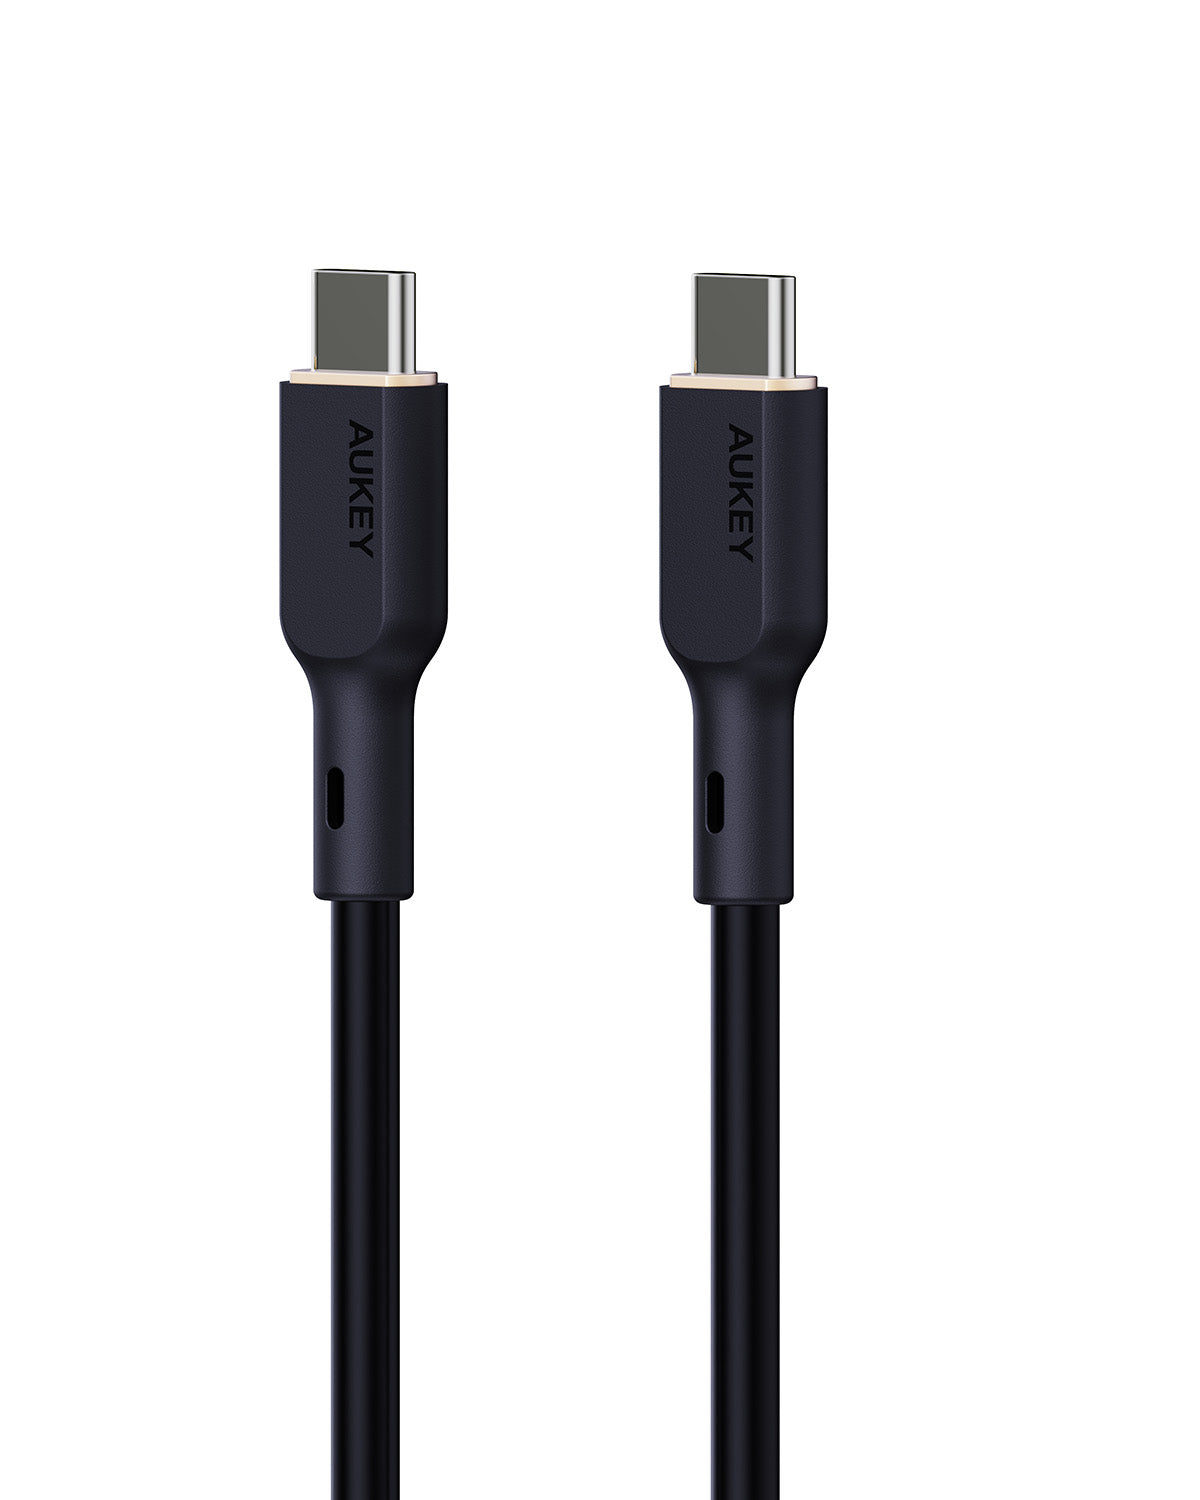 CB-SCC241 Circlet Blink 240W Silicone USB-C to USB-C Cable